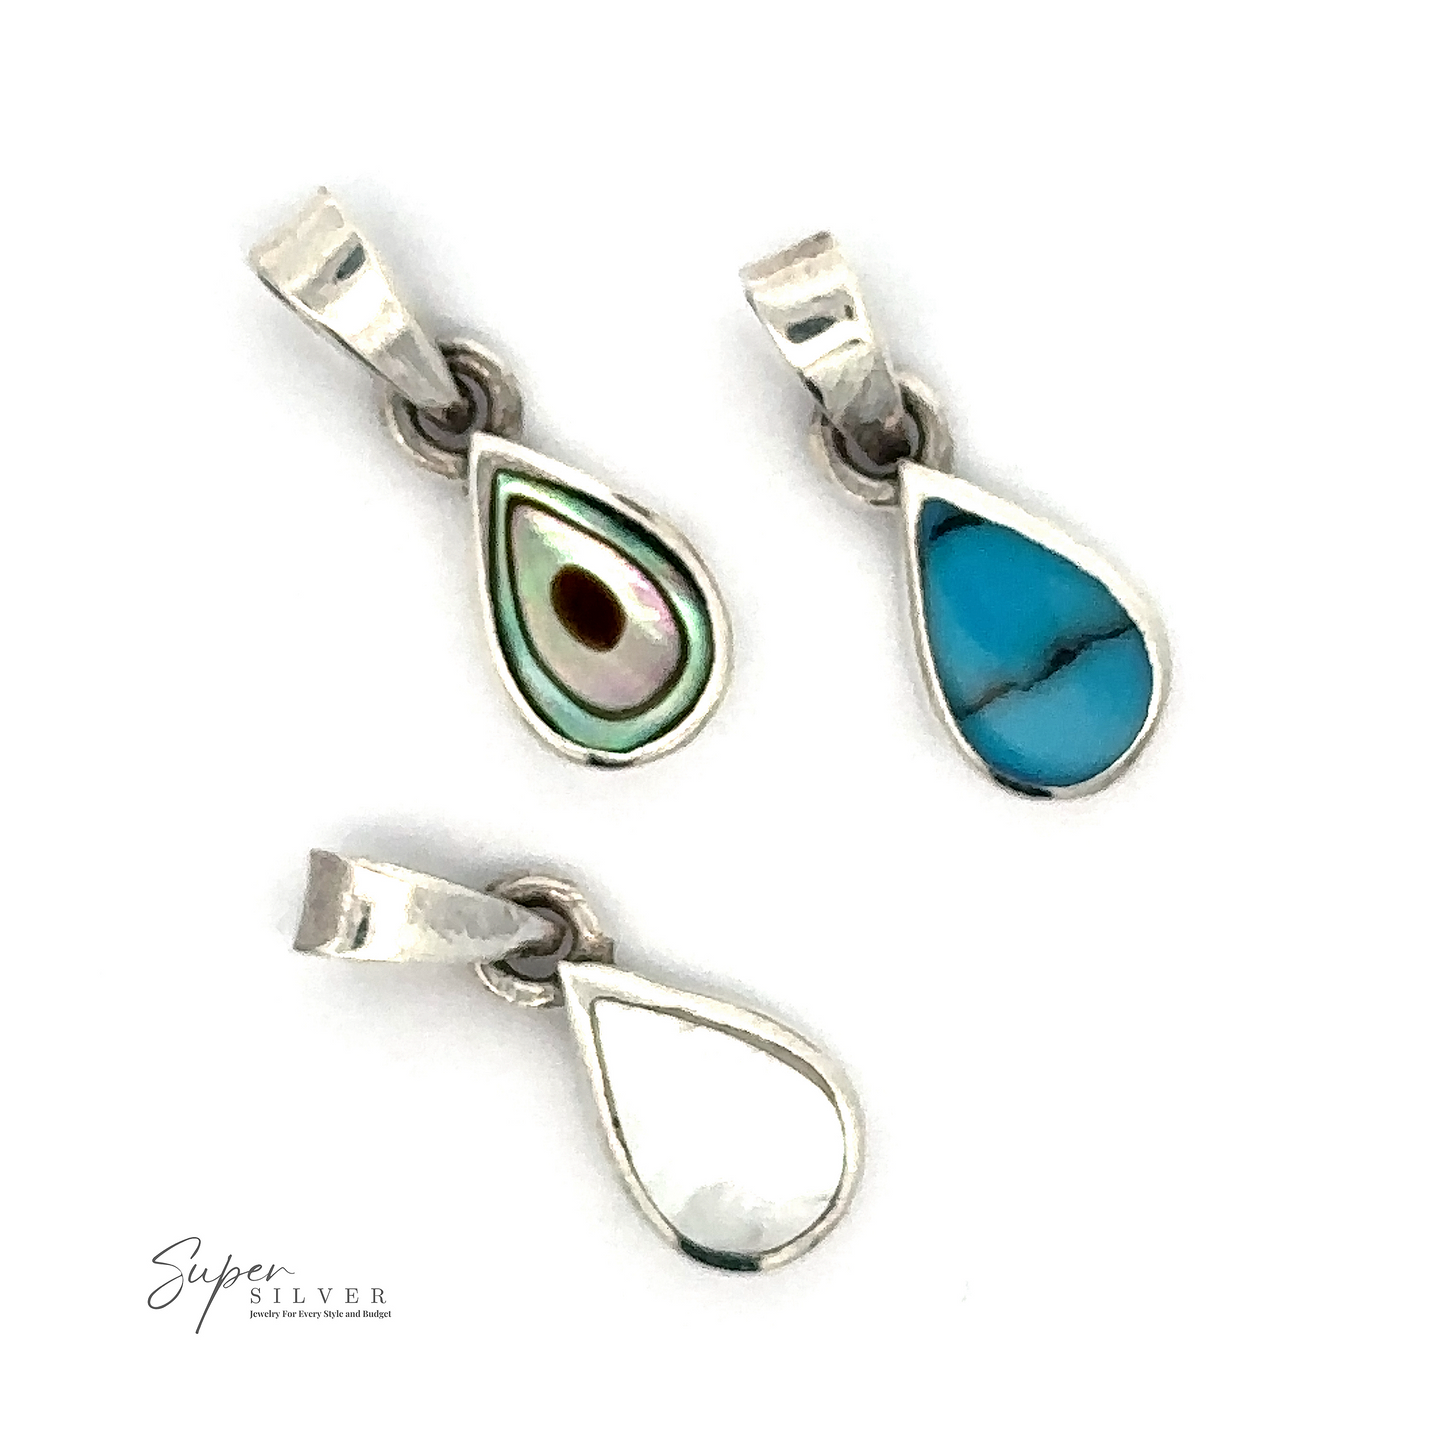 Three Tiny Inlay Teardrop Pendants; one with abalone shell, one with turquoise stone, and one with a white pearl-like inlay. "Super Silver" logo in the bottom left corner. Perfect pieces of minimal jewelry to elevate any outfit.